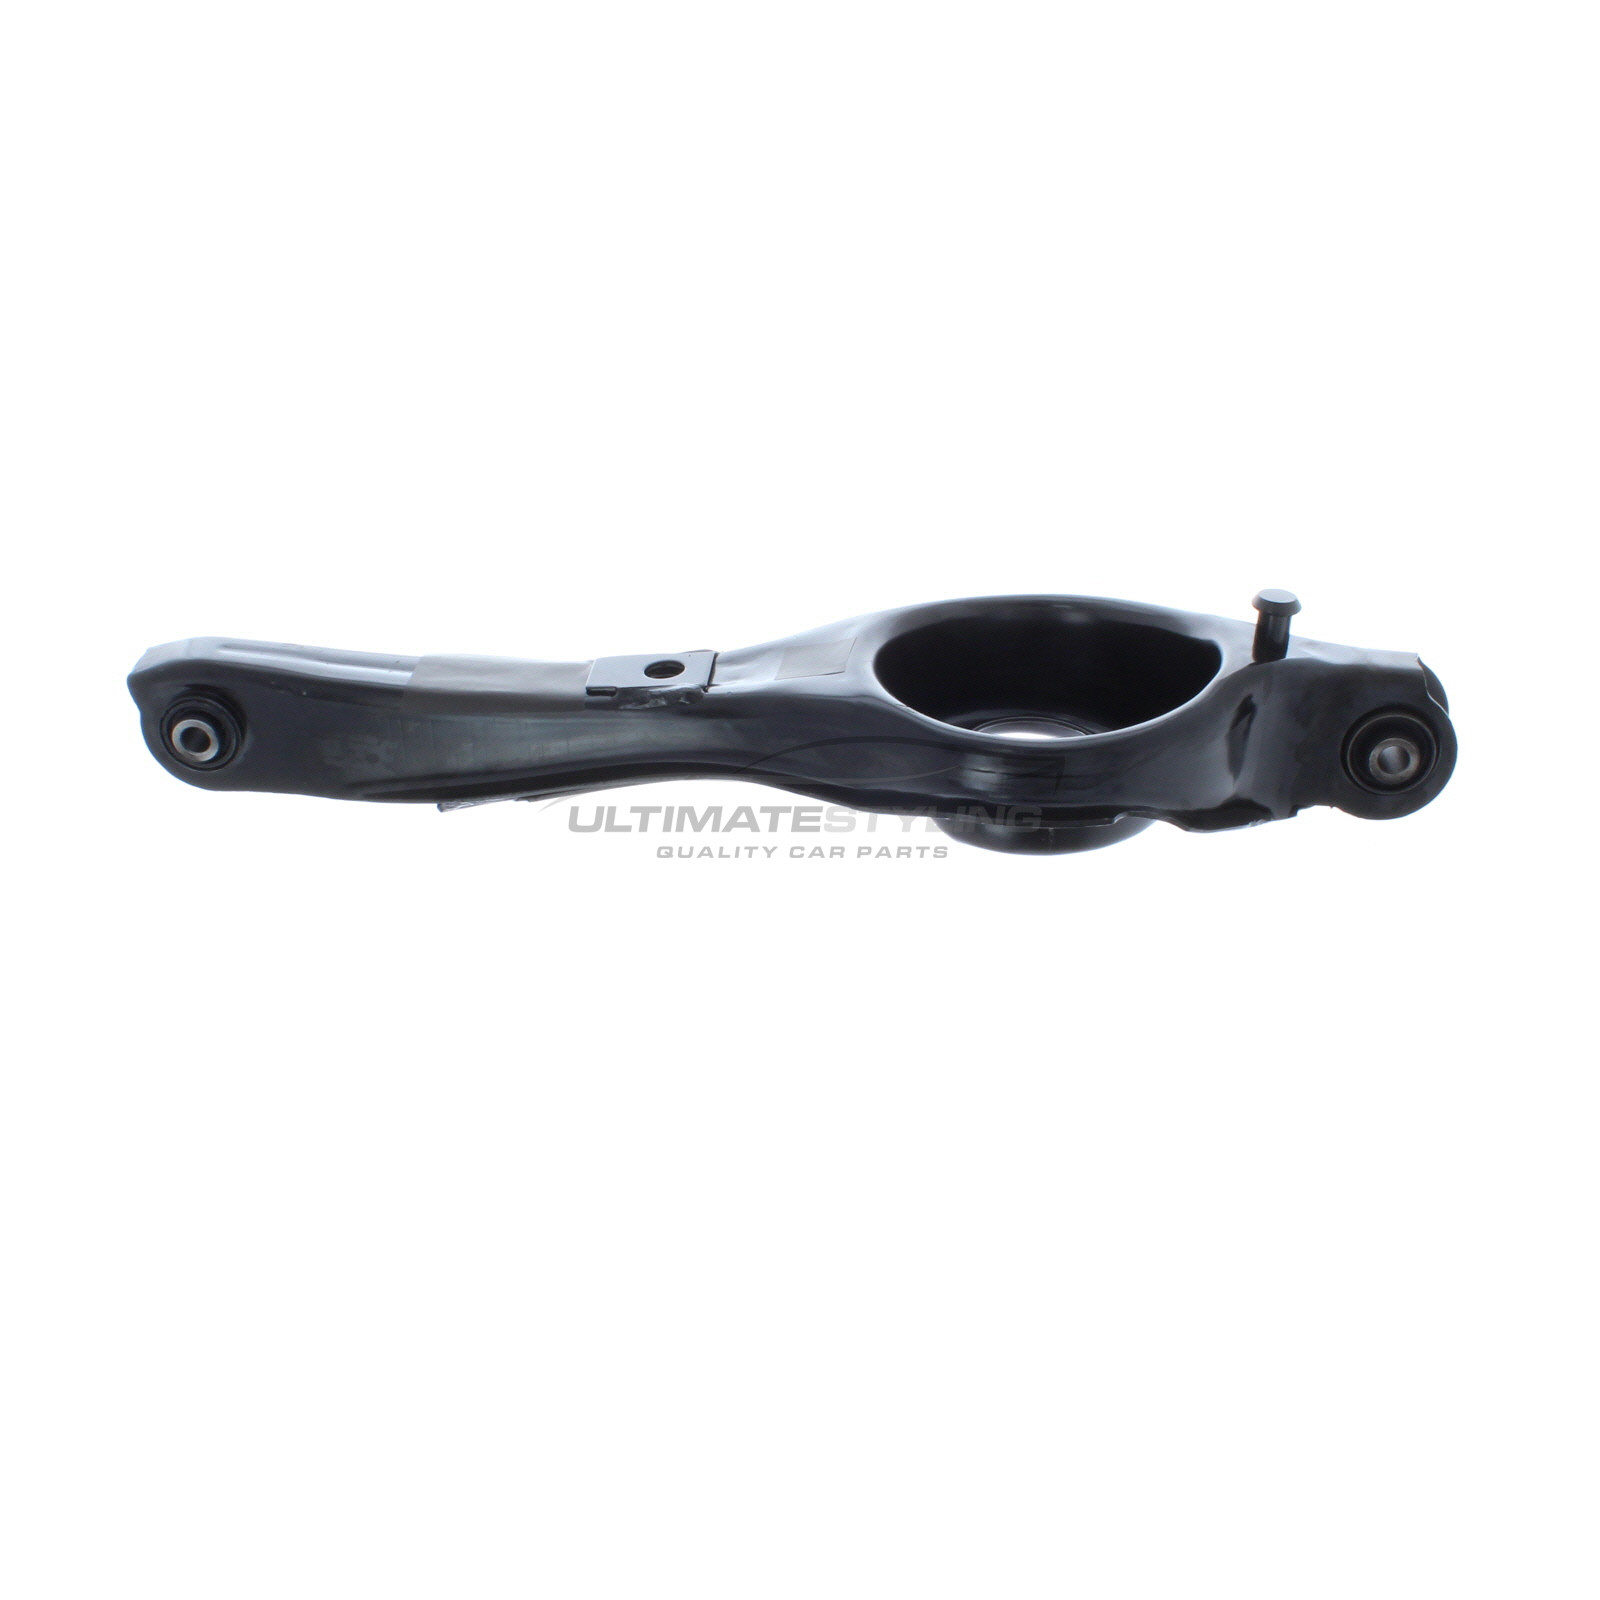 Ford Focus 1998-2005, Mazda 3 2004-2011, Volvo C30 2006-2012, Volvo C70 2006-2014, Volvo S40 2004-2012, Volvo V50 2004-2012 Rear Lower Suspension Arm (Steel) Excluding Ball Joint and Rear Bush (Rear of Wheel) Universal (LH or RH)